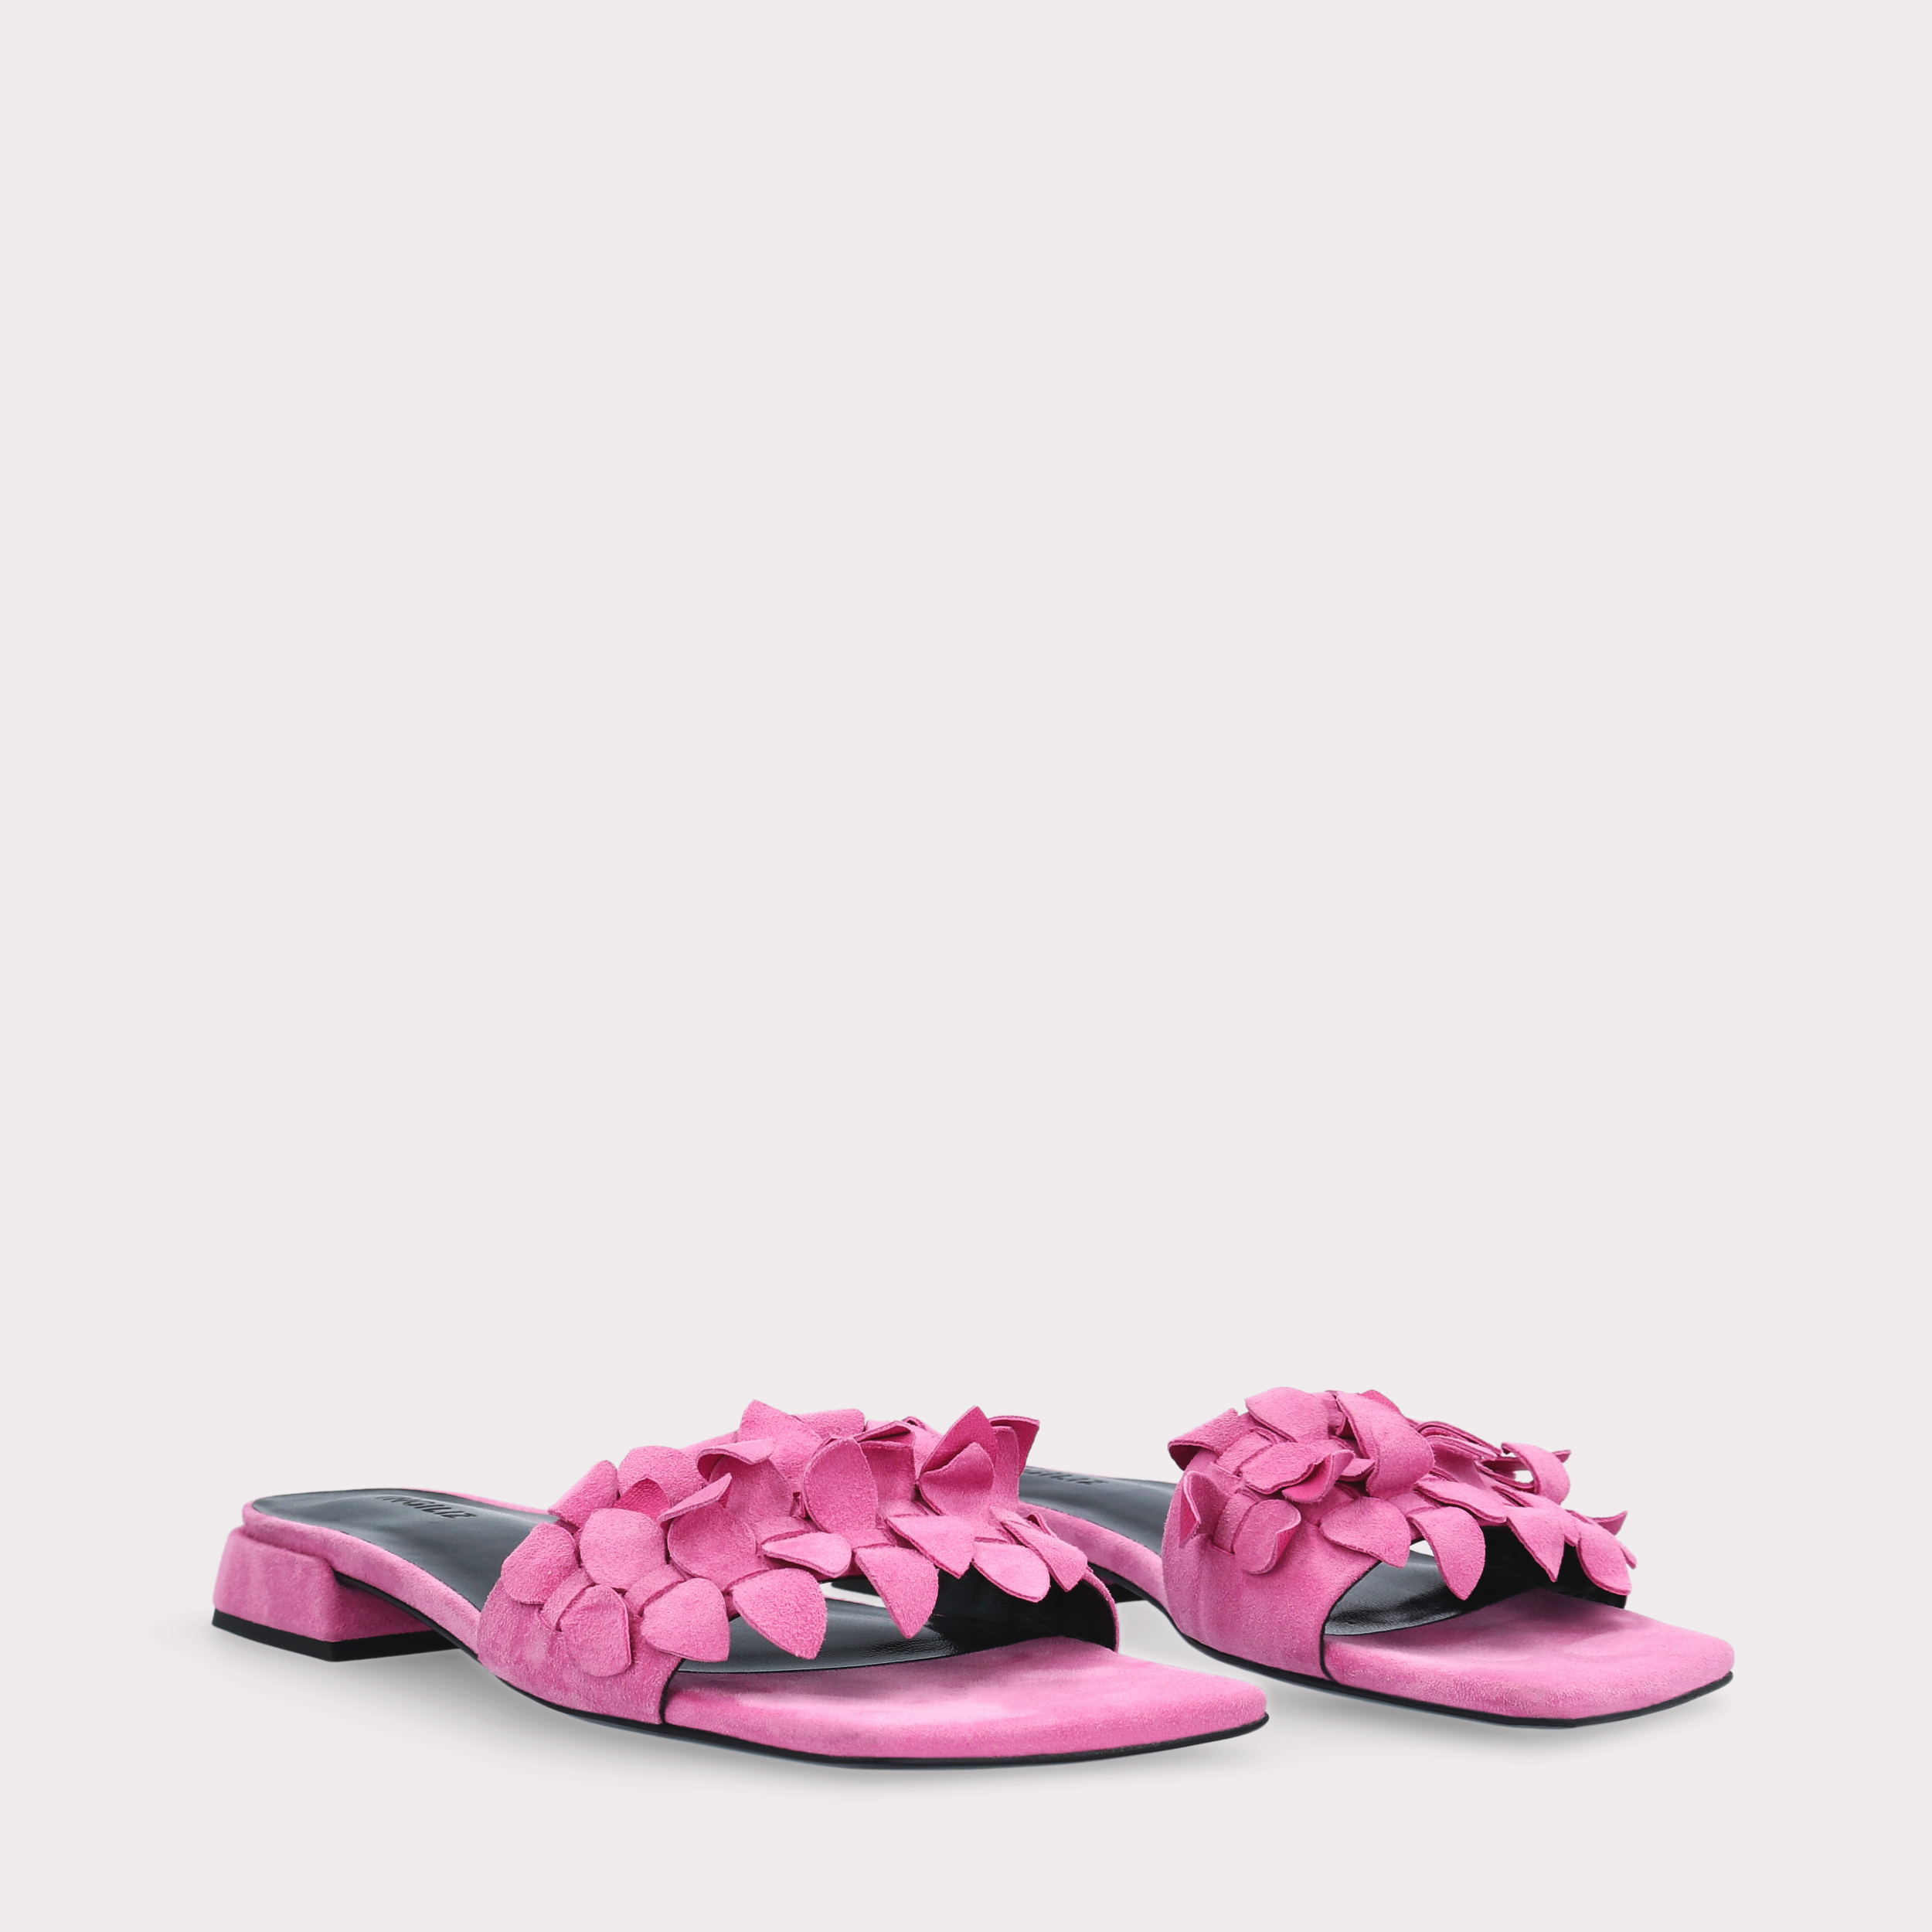 POLLY 01 FUCHSIA SUEDE LEATHER MULES